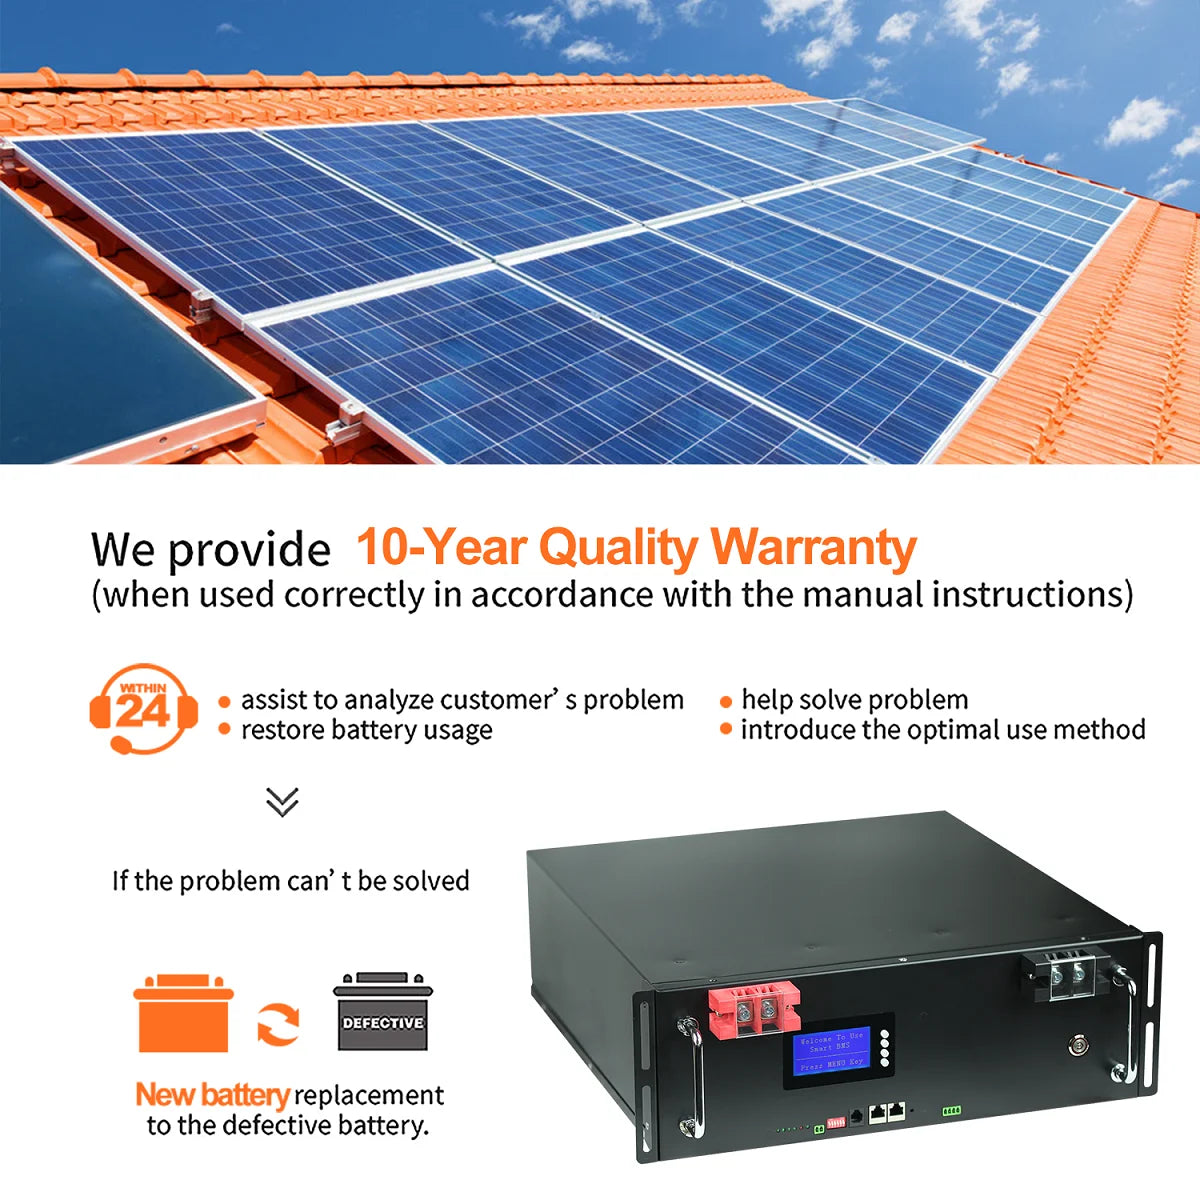 New 48V 100Ah LiFePo4 Battery, Battery warranty: 10-year guarantee with 24/7 support and replacement if issues persist.